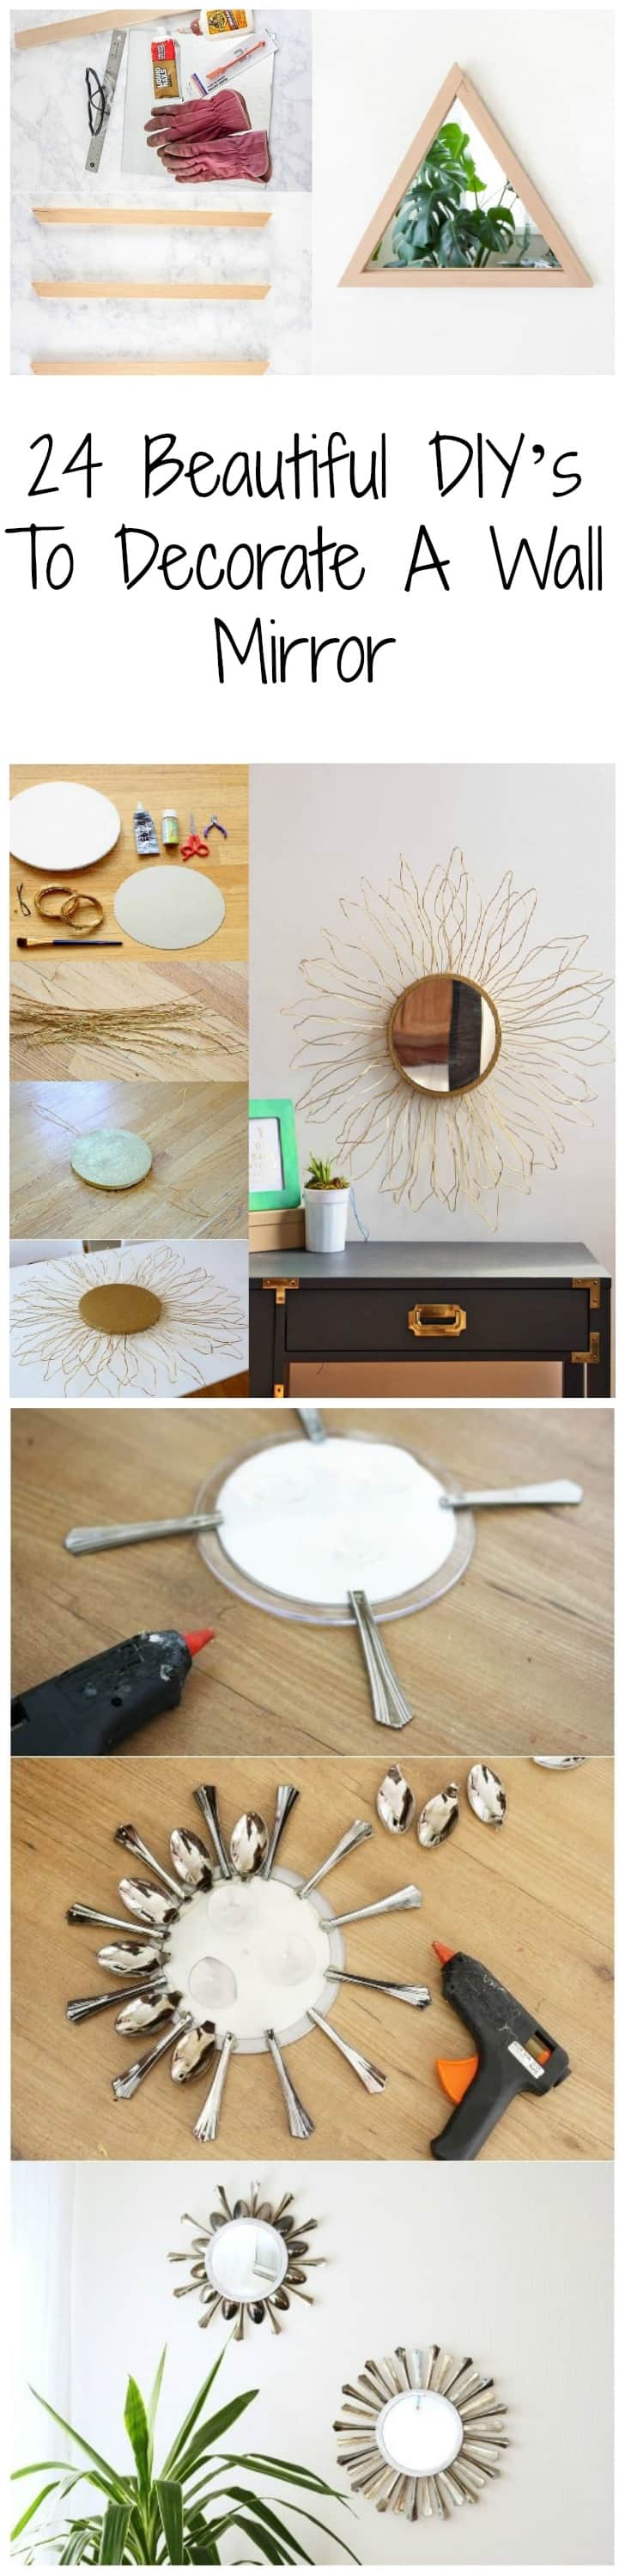 24 Beautiful DIY’s To Decorate A Wall Mirror